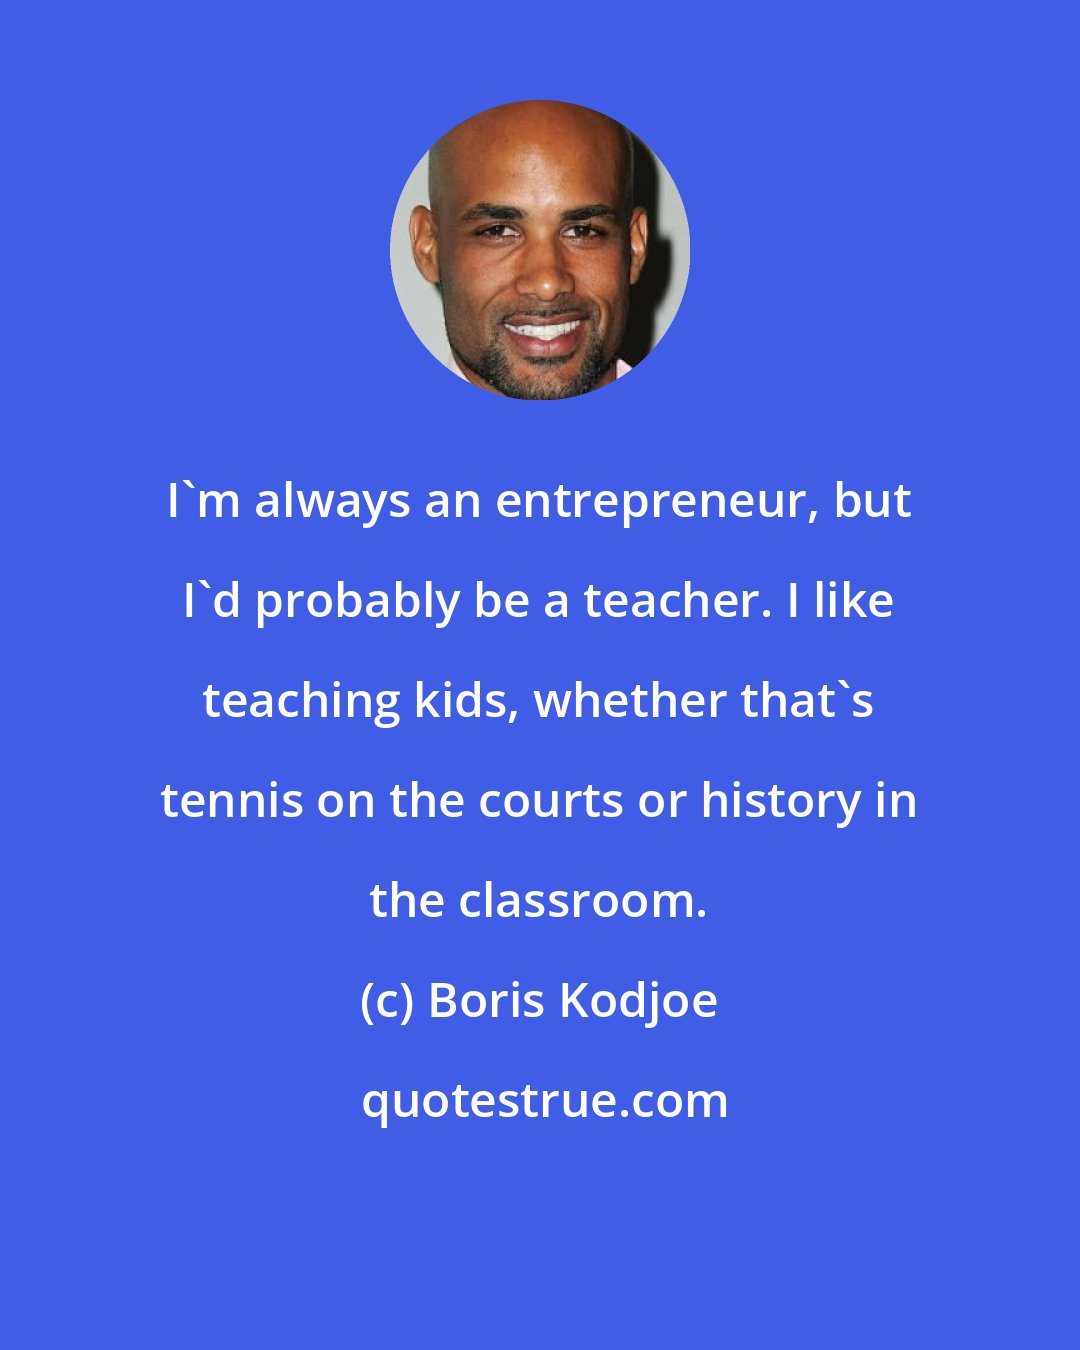 Boris Kodjoe: I'm always an entrepreneur, but I'd probably be a teacher. I like teaching kids, whether that's tennis on the courts or history in the classroom.